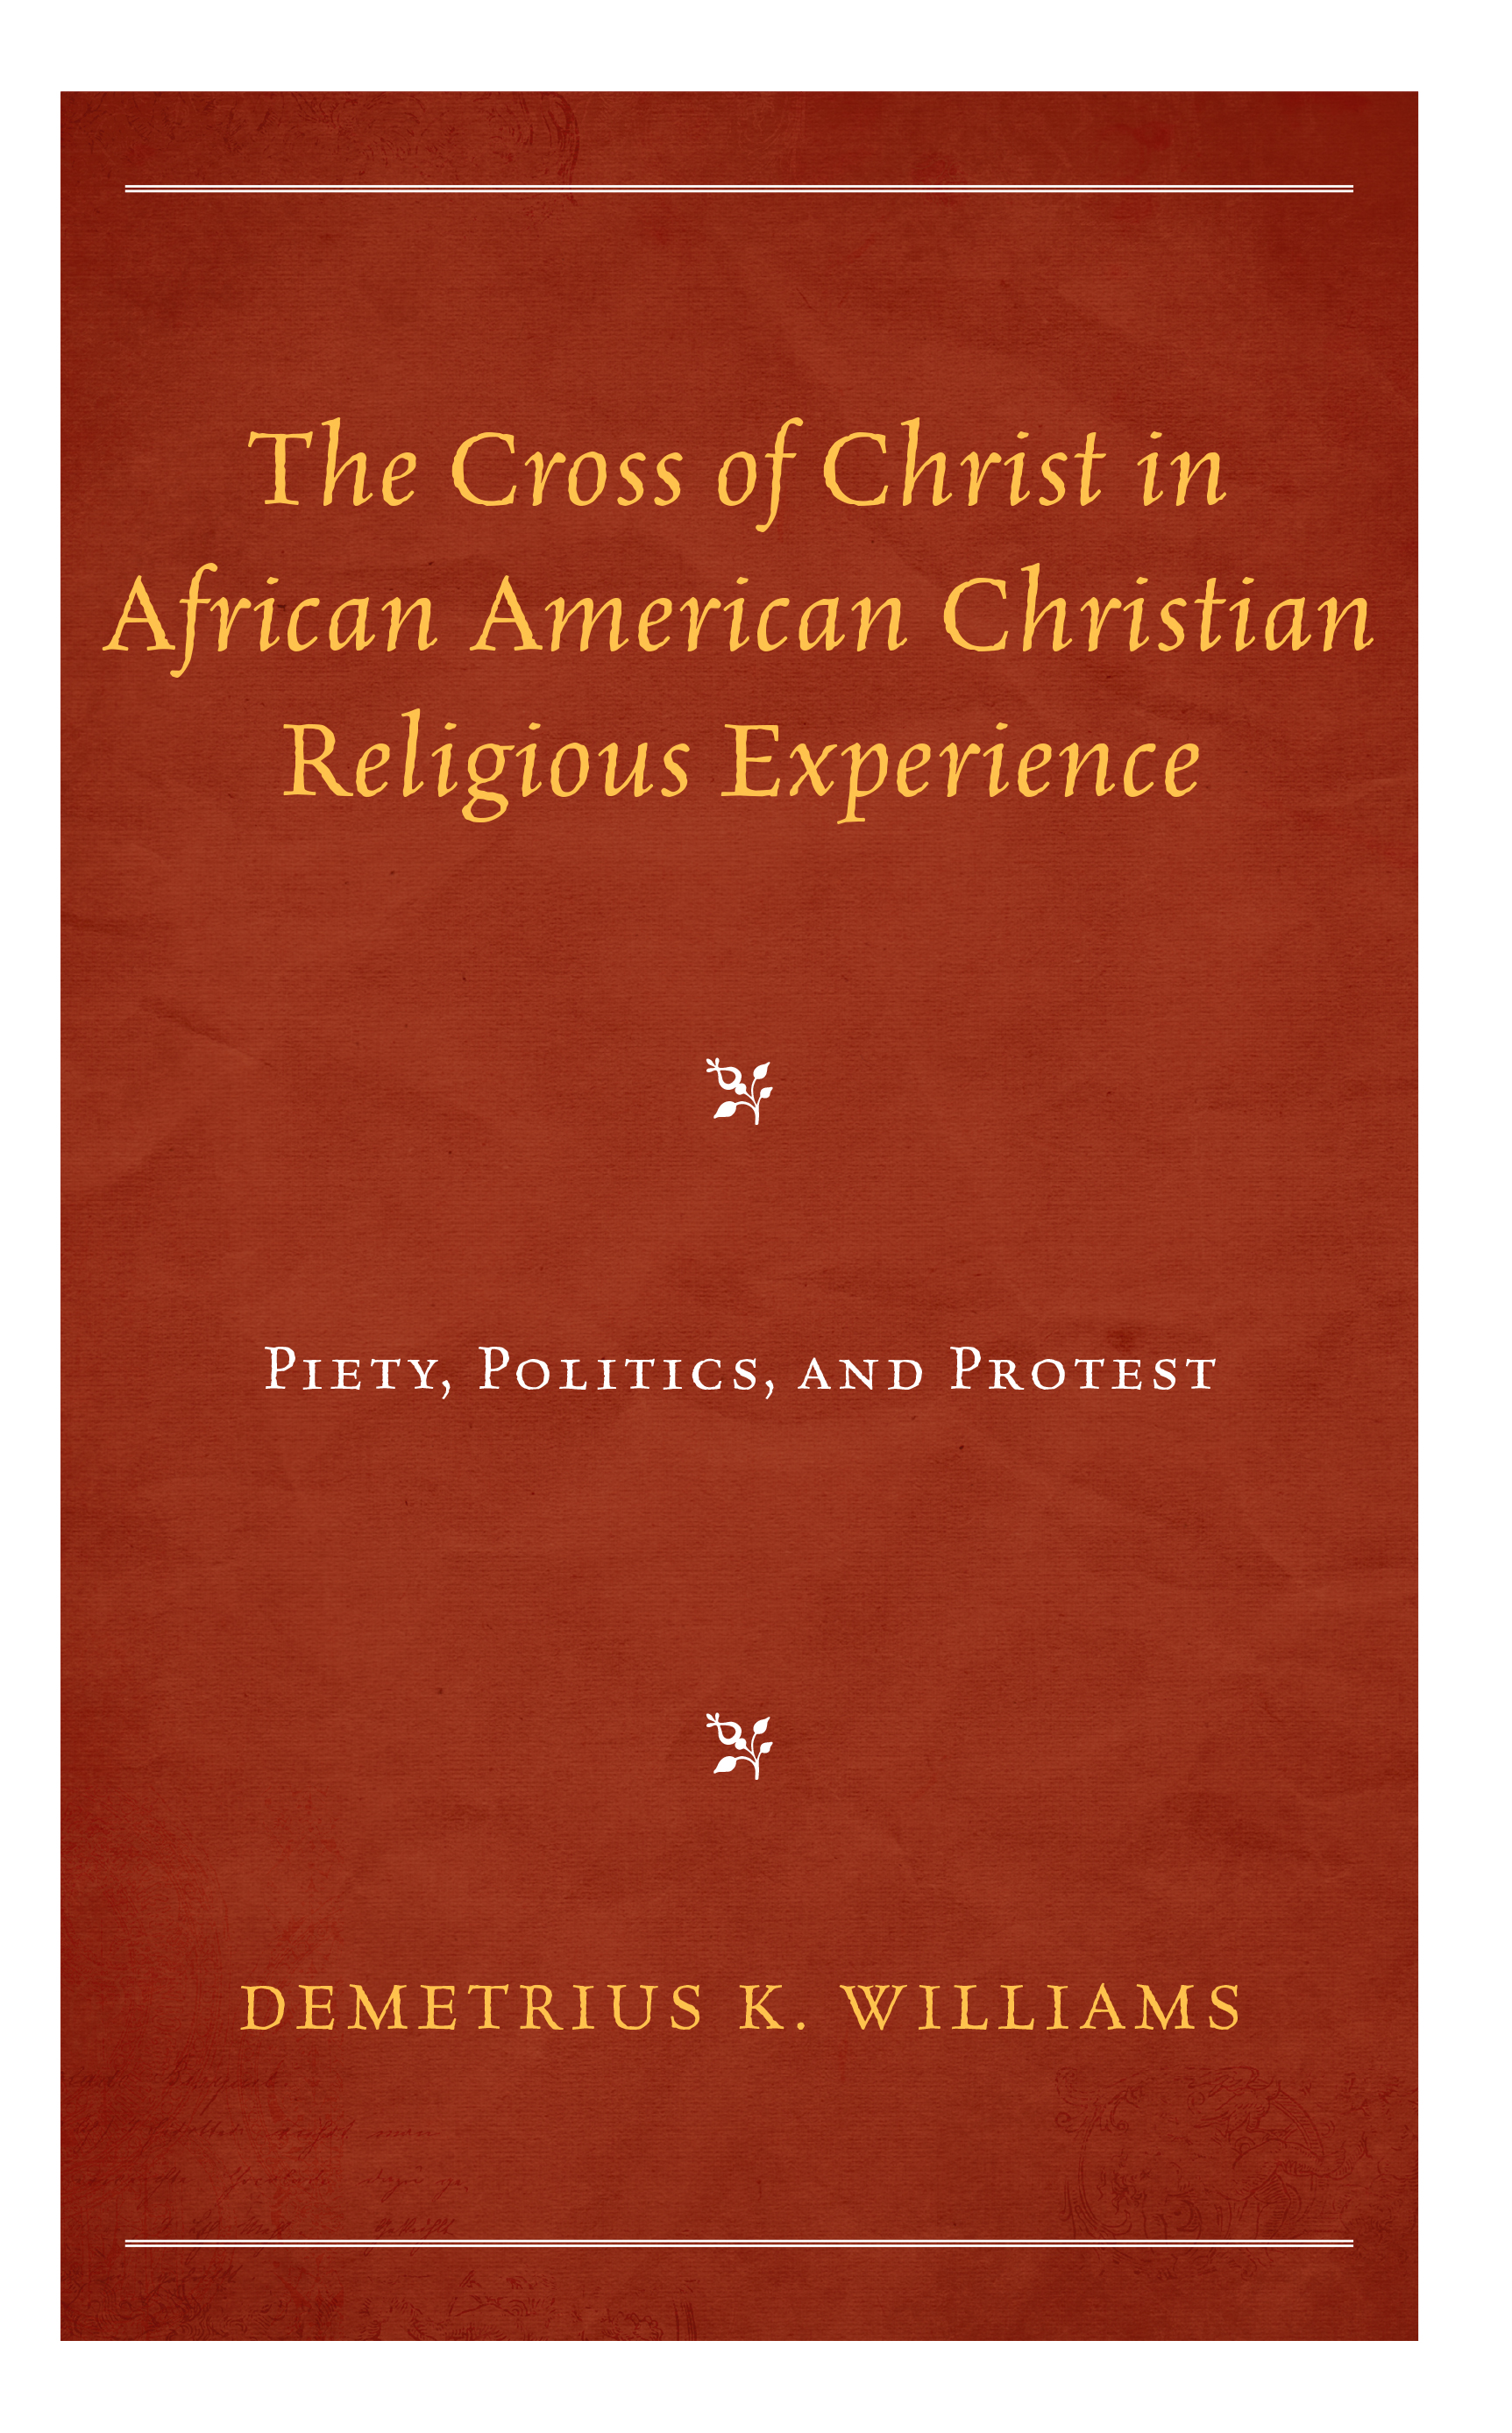 The Cross of Christ in African American Christian Religious Experience: Piety, Politics, and Protest